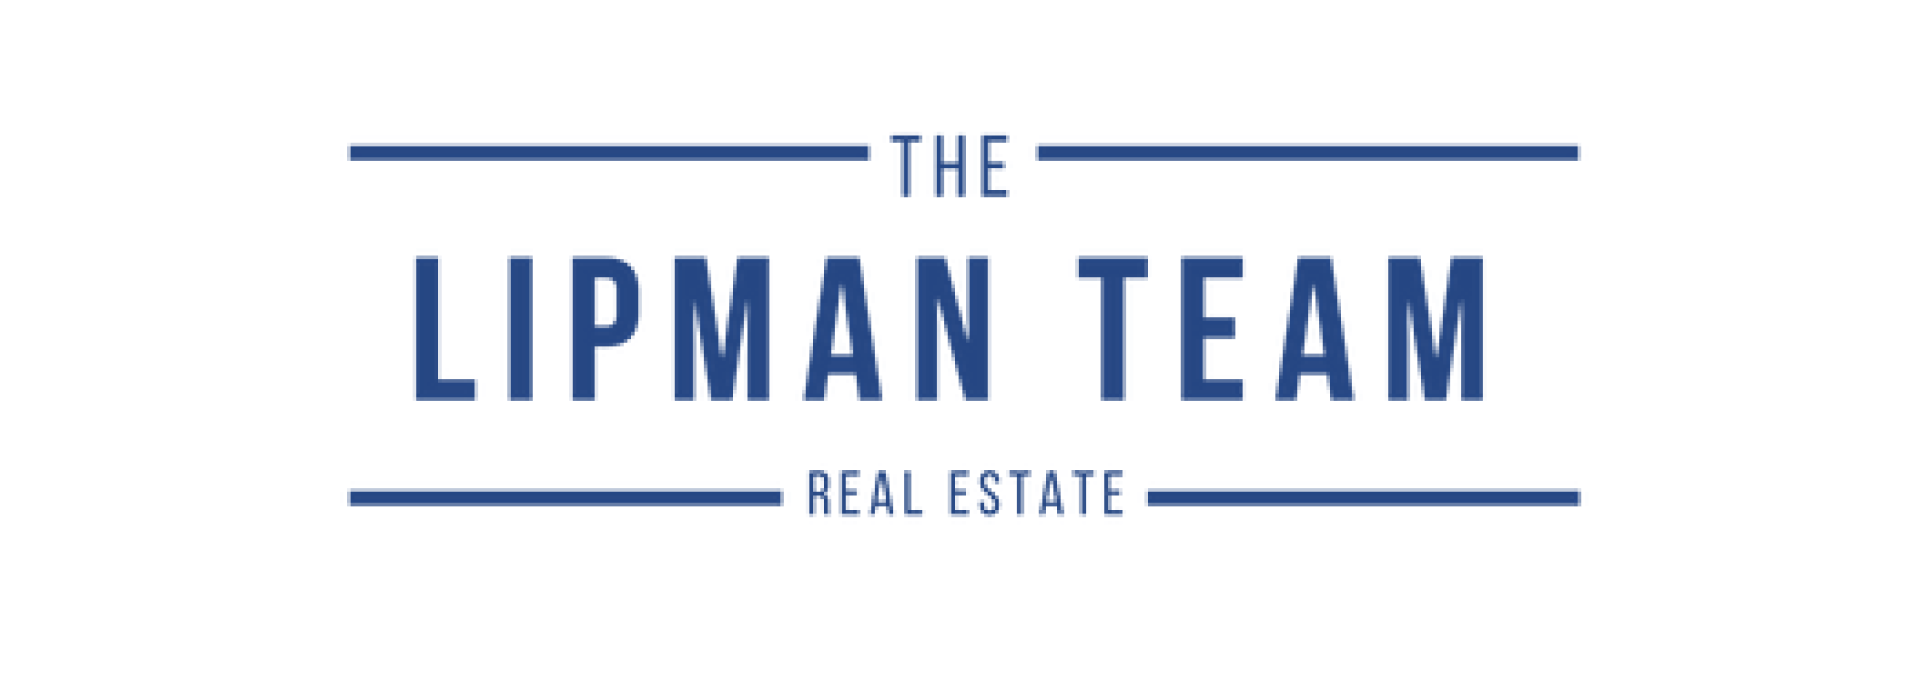 Welcome to the Lipman Team Real Estate